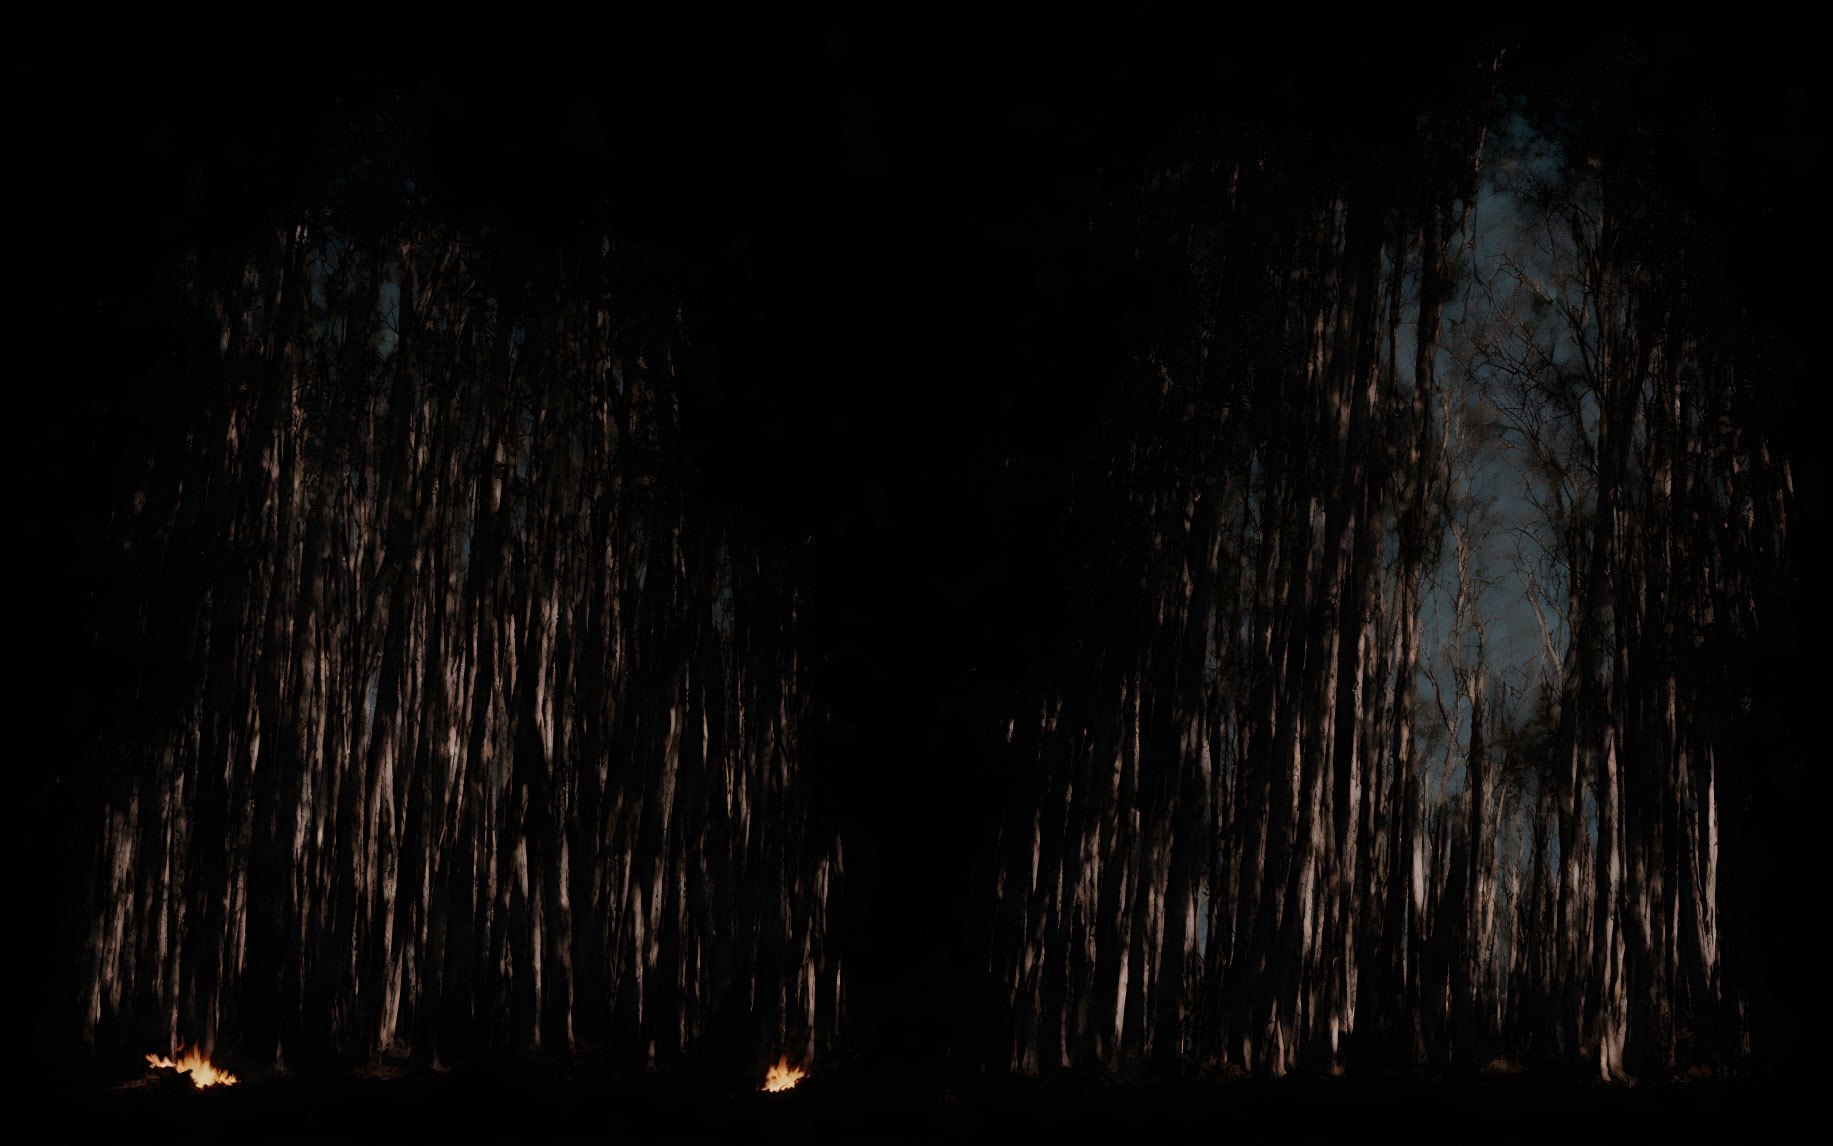 Dark forest at night with small fire, tall tree trunks, and moonlight.